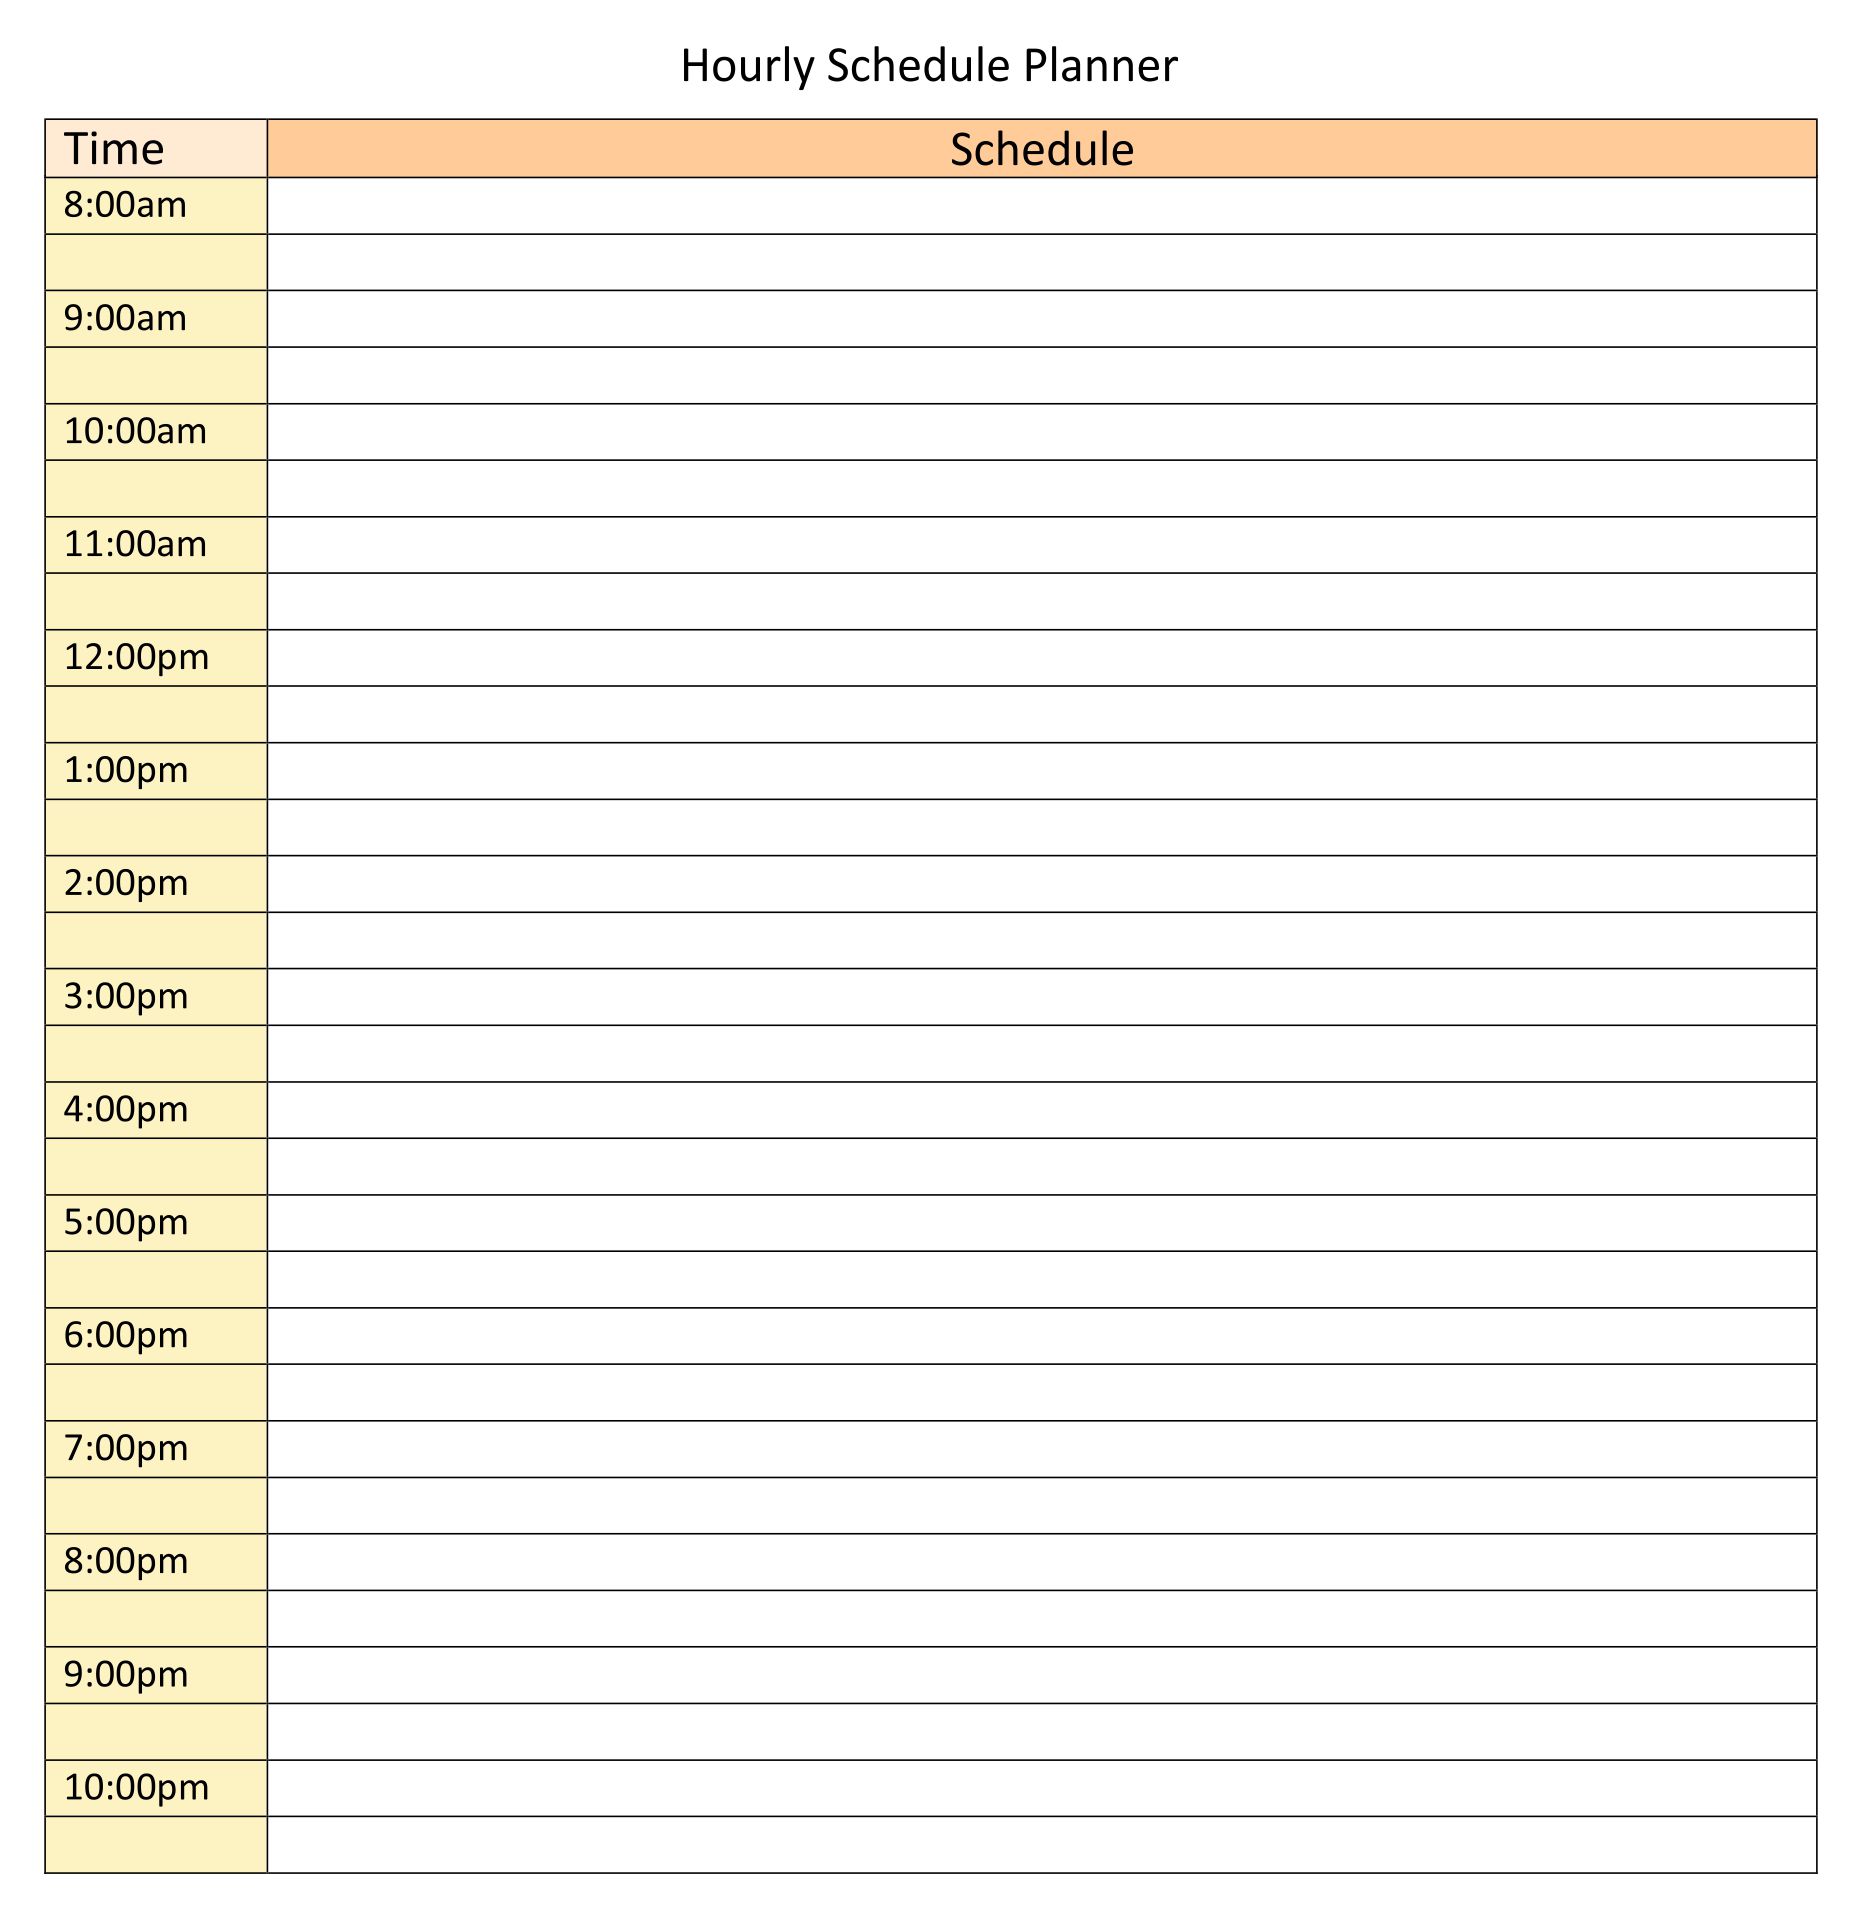 Hourly Weekly Schedule Template from printablee.com